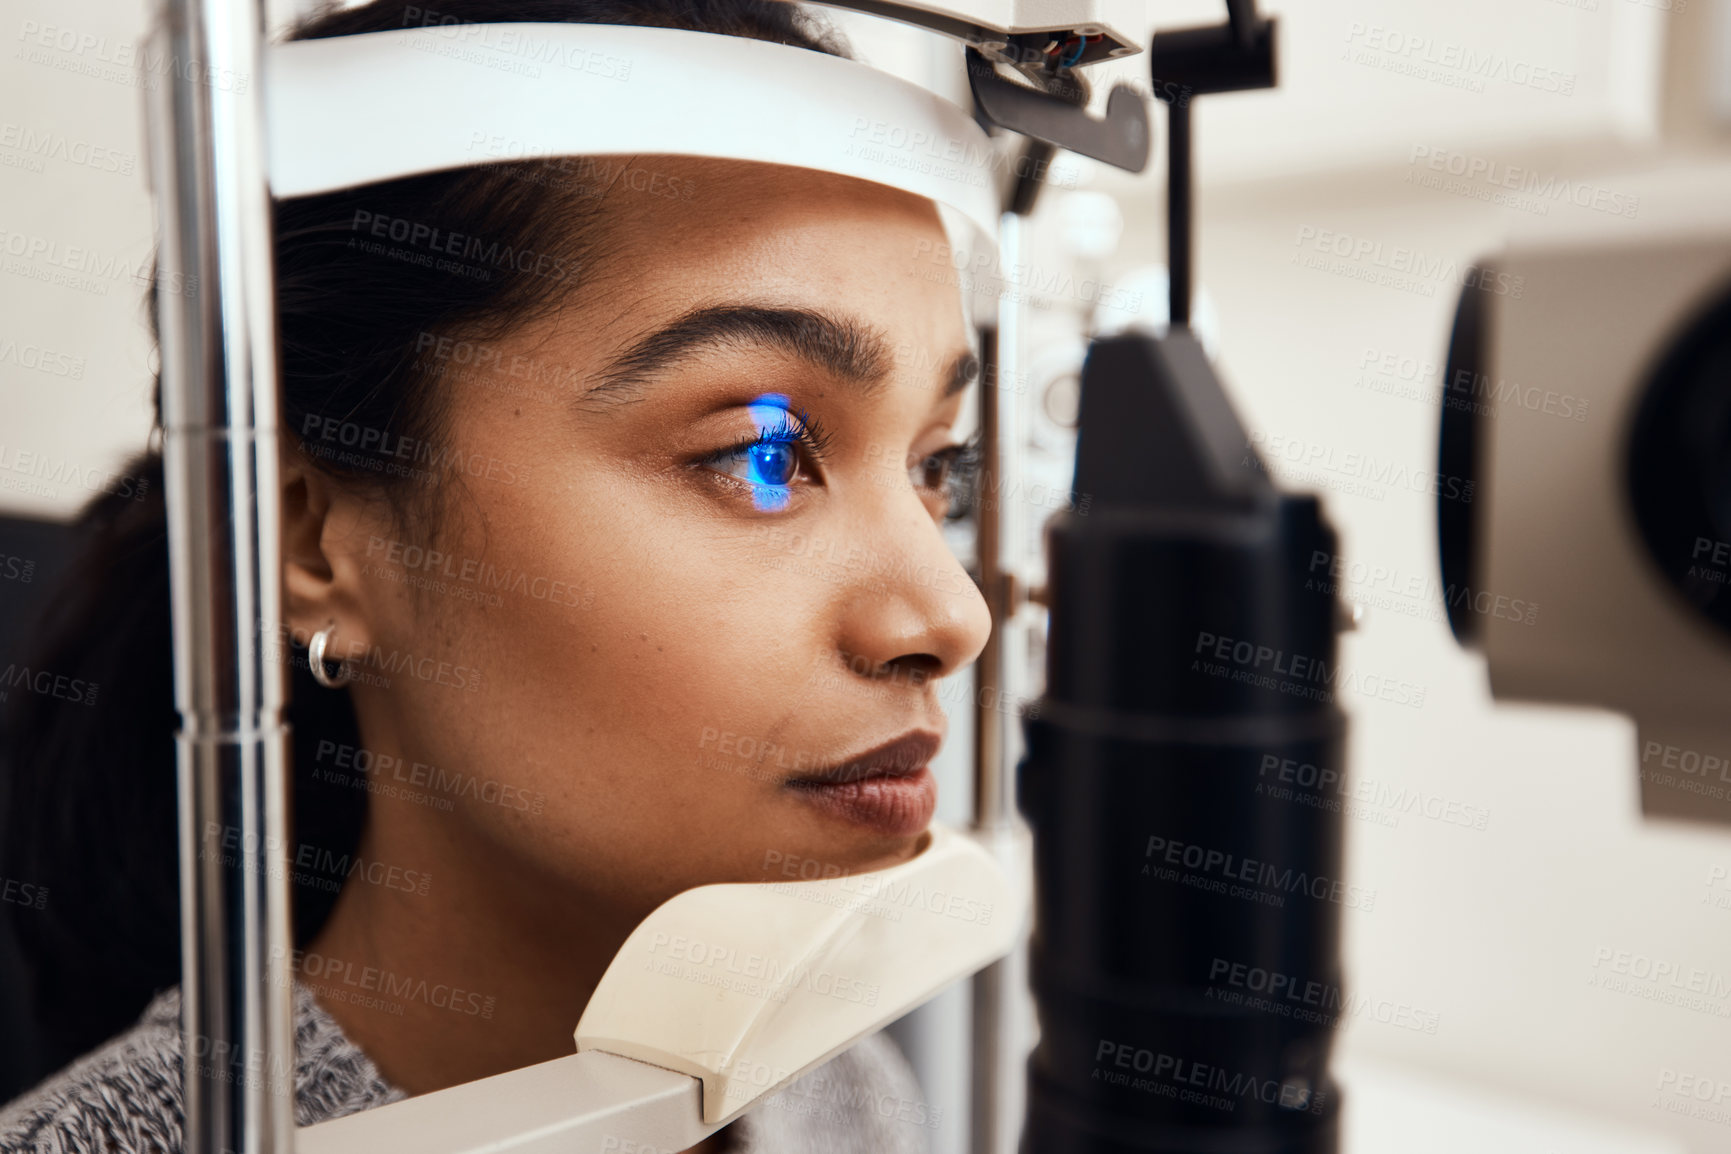 Buy stock photo Shot of a young woman getting her eye’s examined with a slit lamp